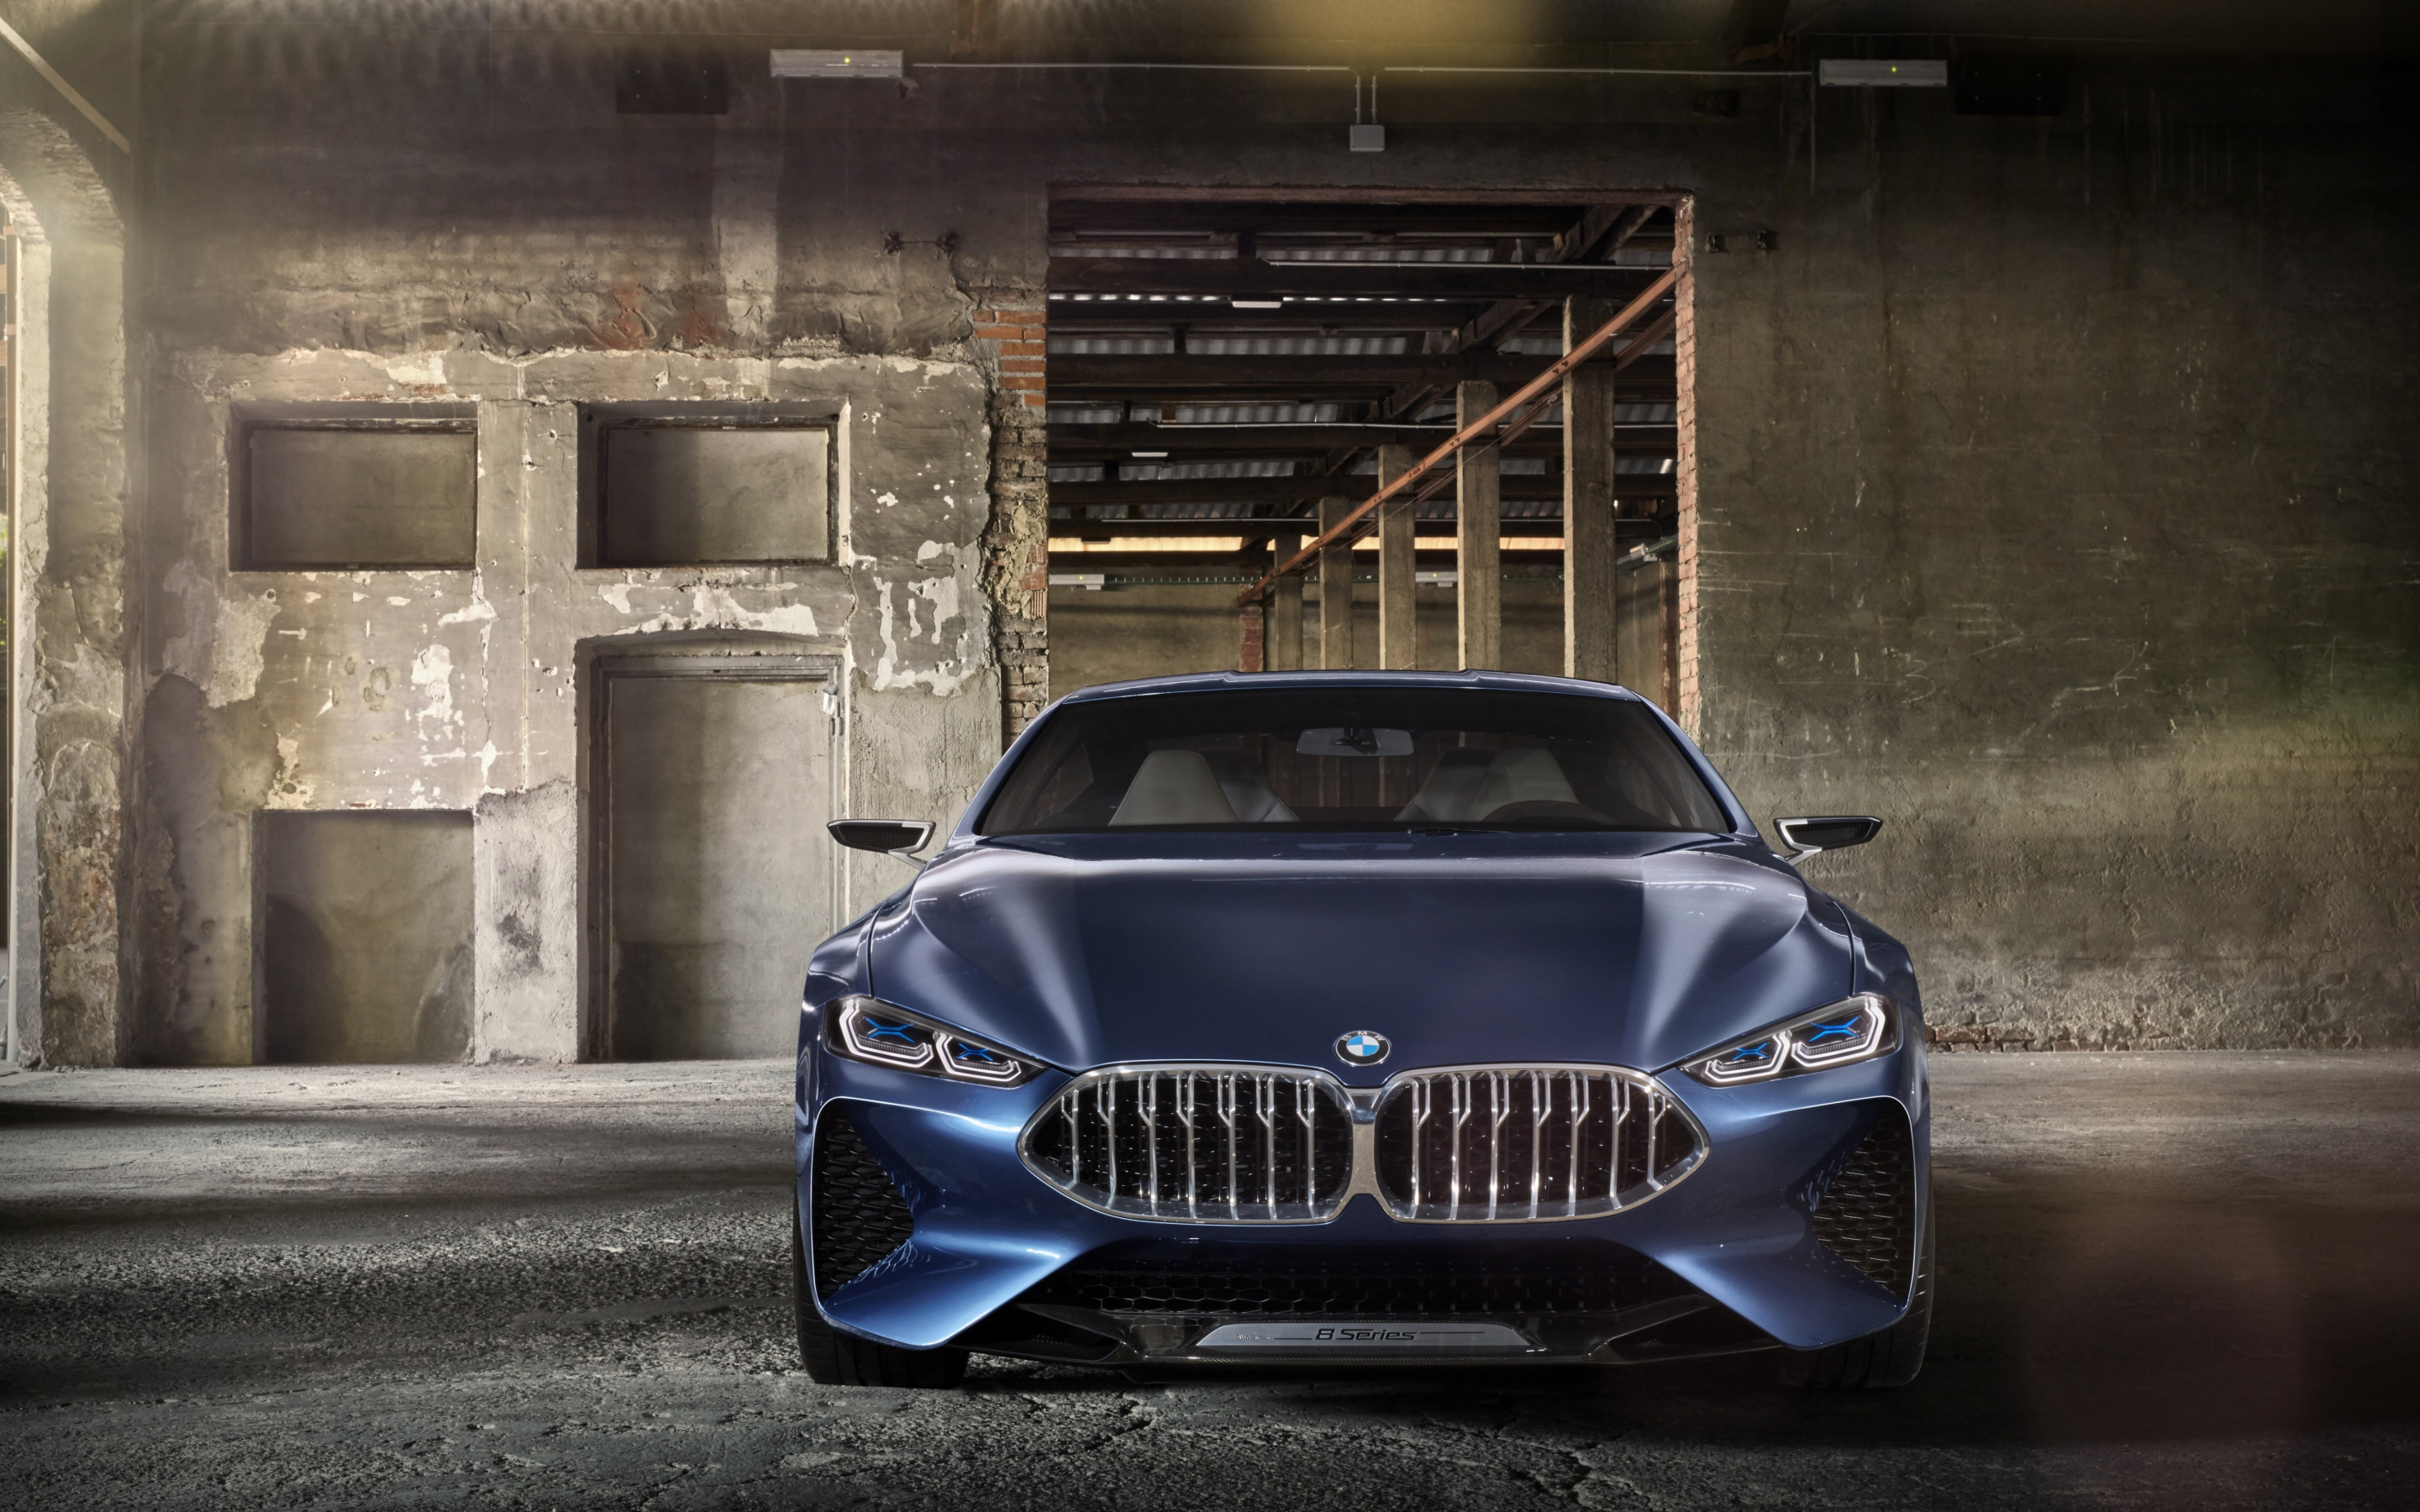 2018, Front view, Bmw concept 8 series, 2880x1800 wallpaper